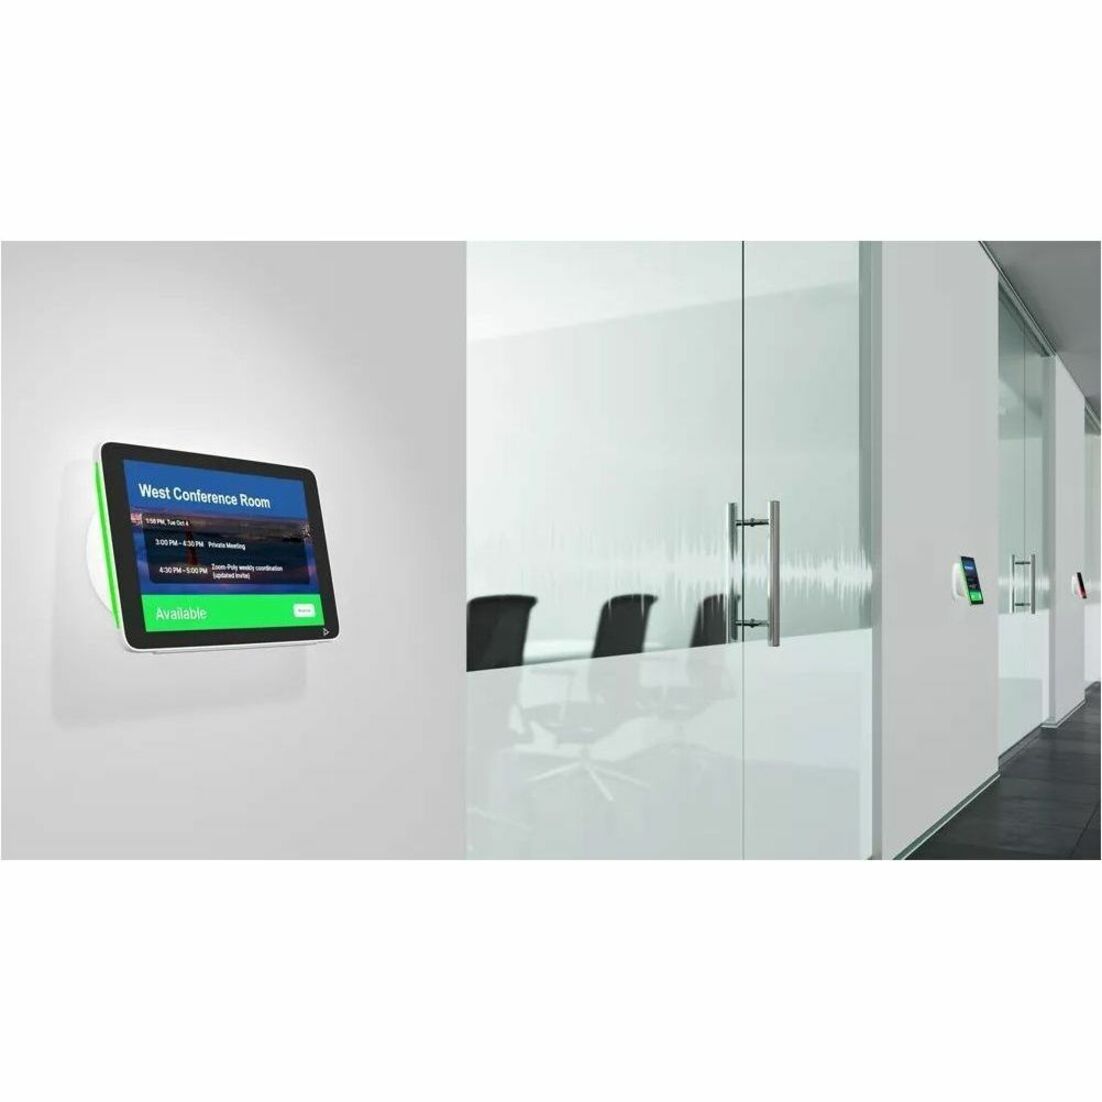 Poly 2200-37760-001 TC10 Video Conference Equipment, Multi-touch Screen, Kensington Lock